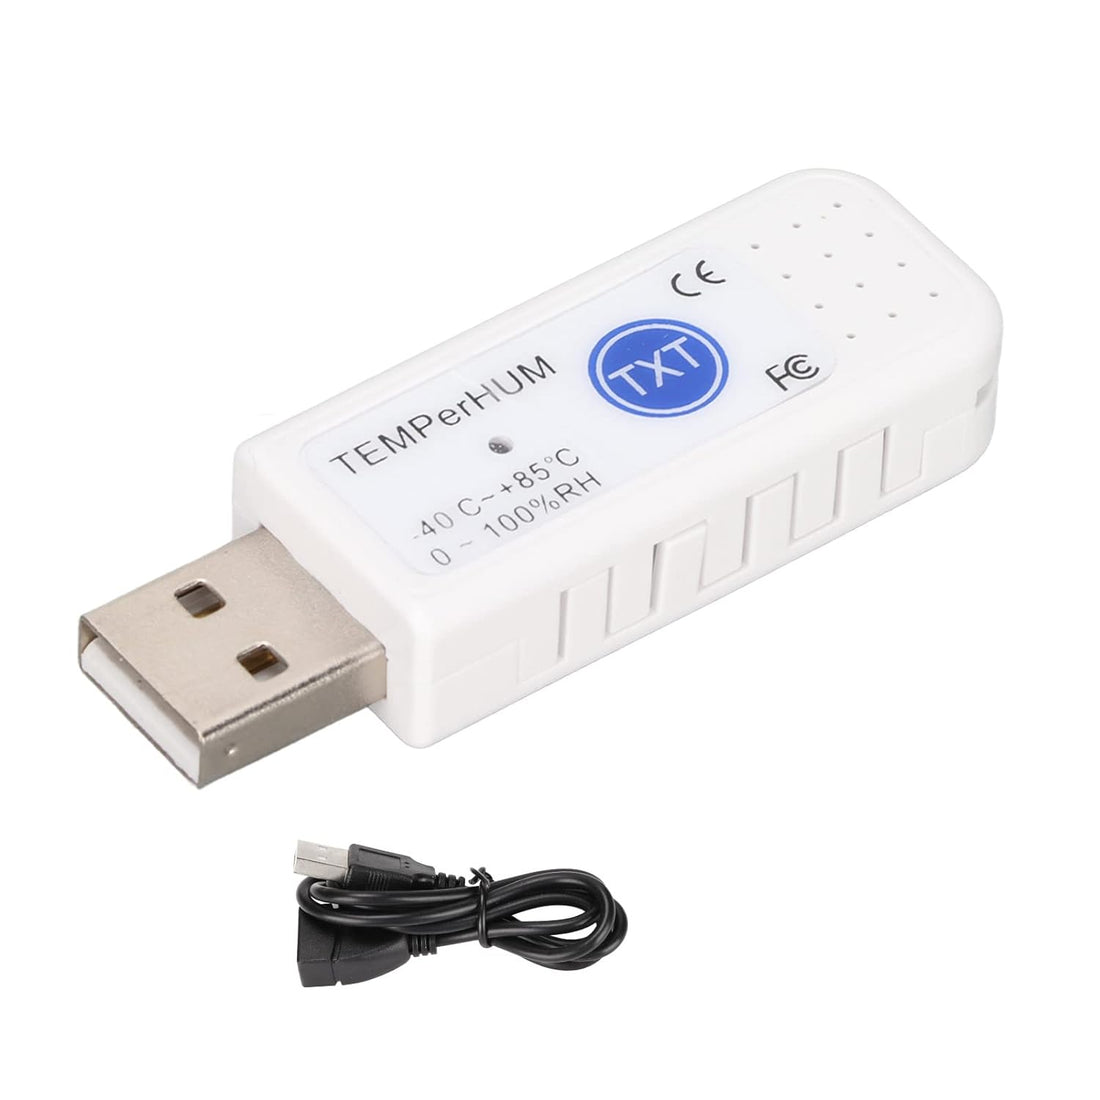 Computer USB Thermometer Data Logger, Plug and Play Free PC Software for Logging Temperature with Email Alarm, for Temperature and Humidity Data